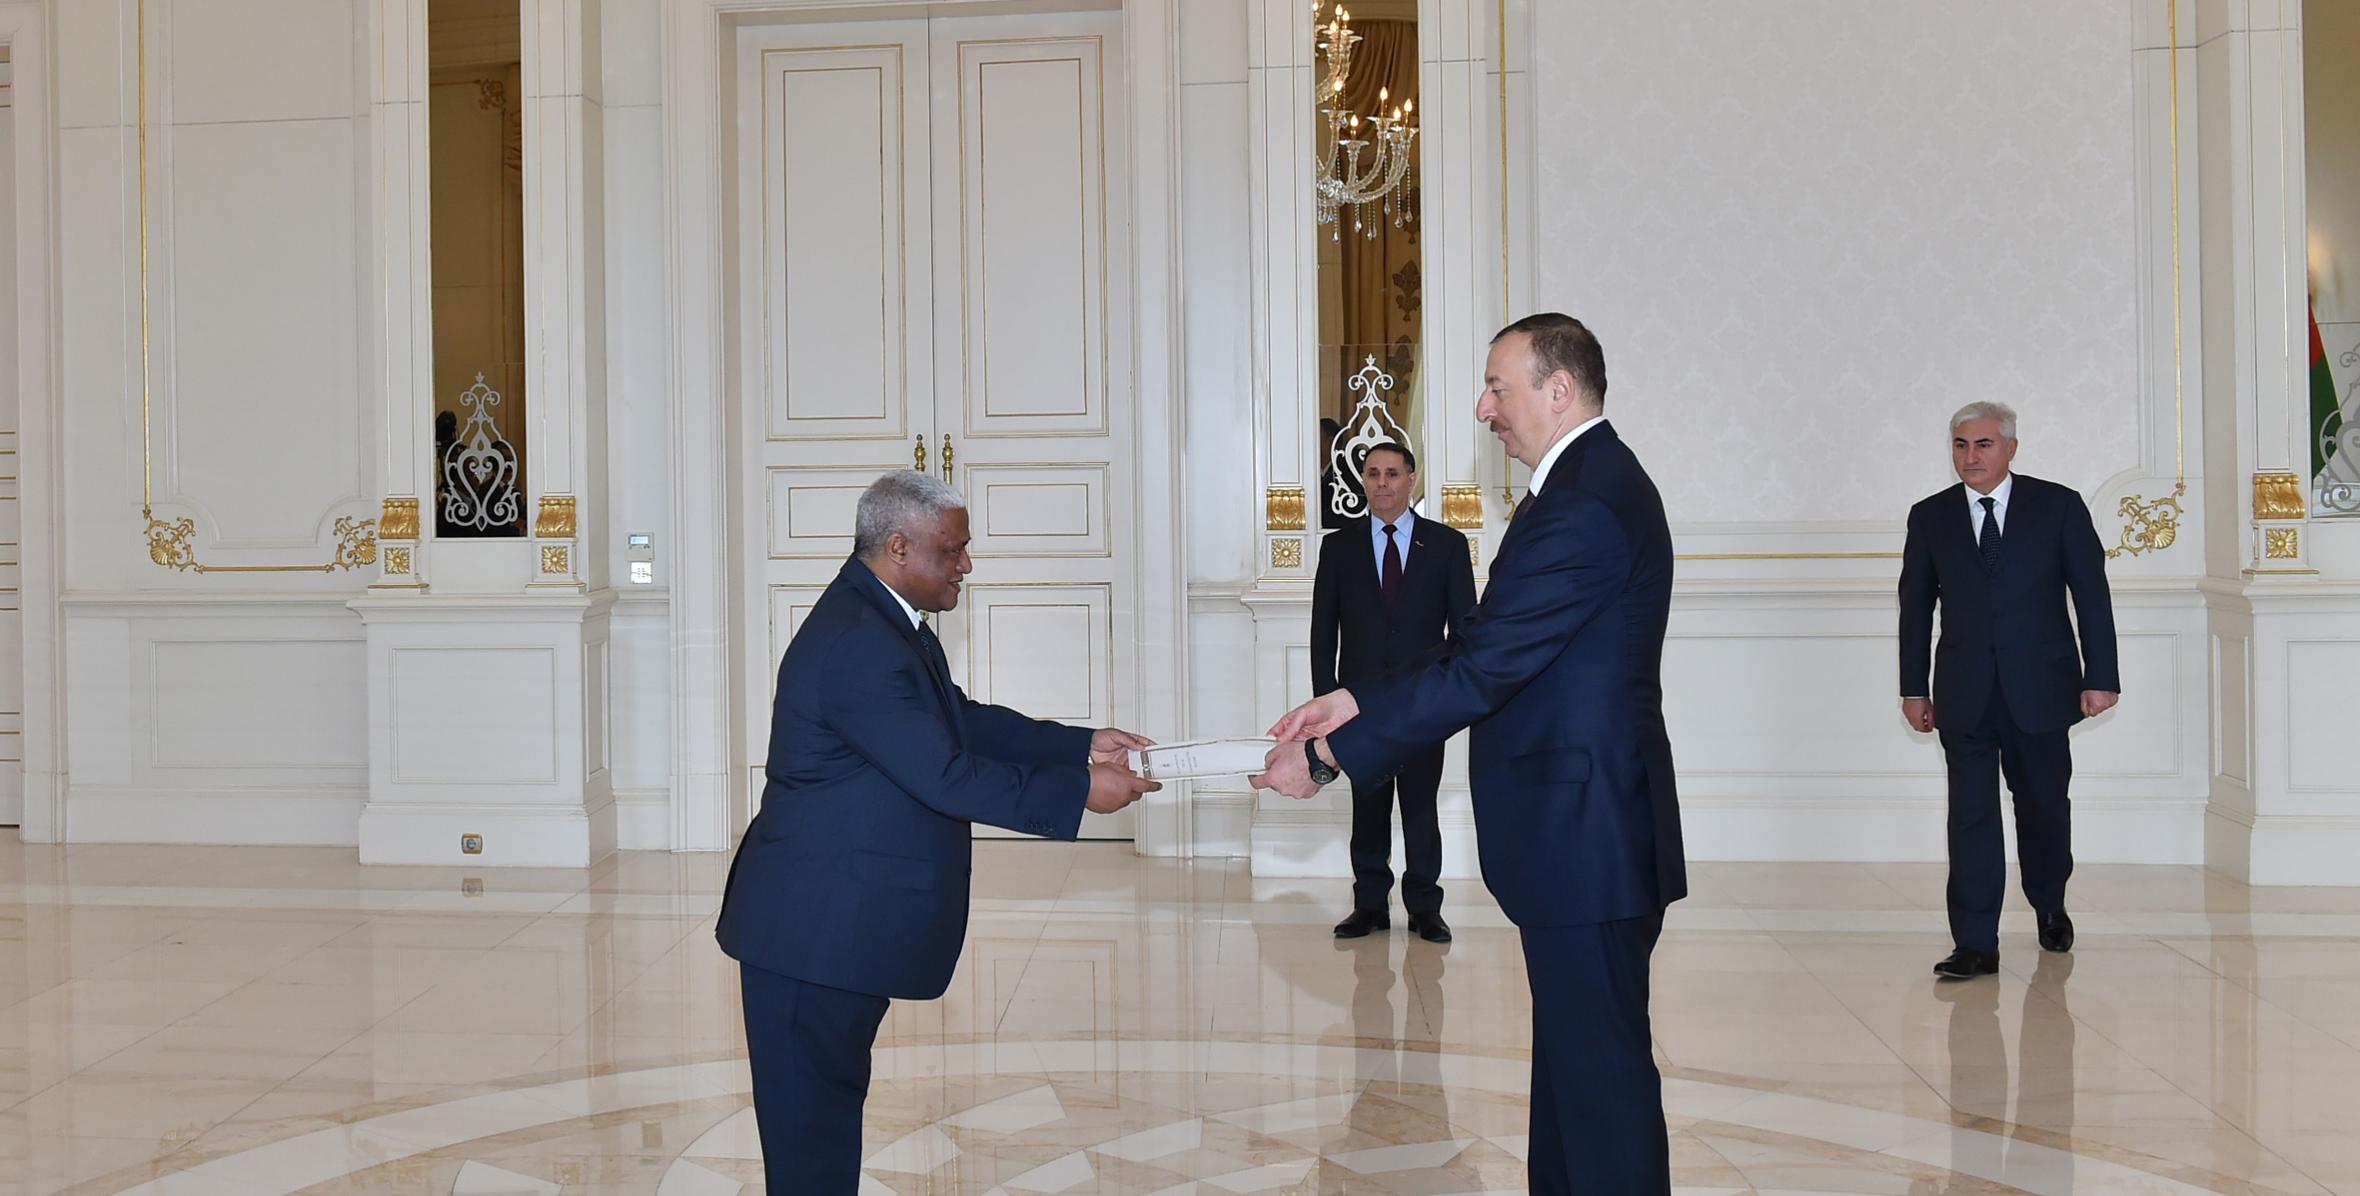 Ilham Aliyev received the credentials of the newly-appointed Ambassador of Ethiopia